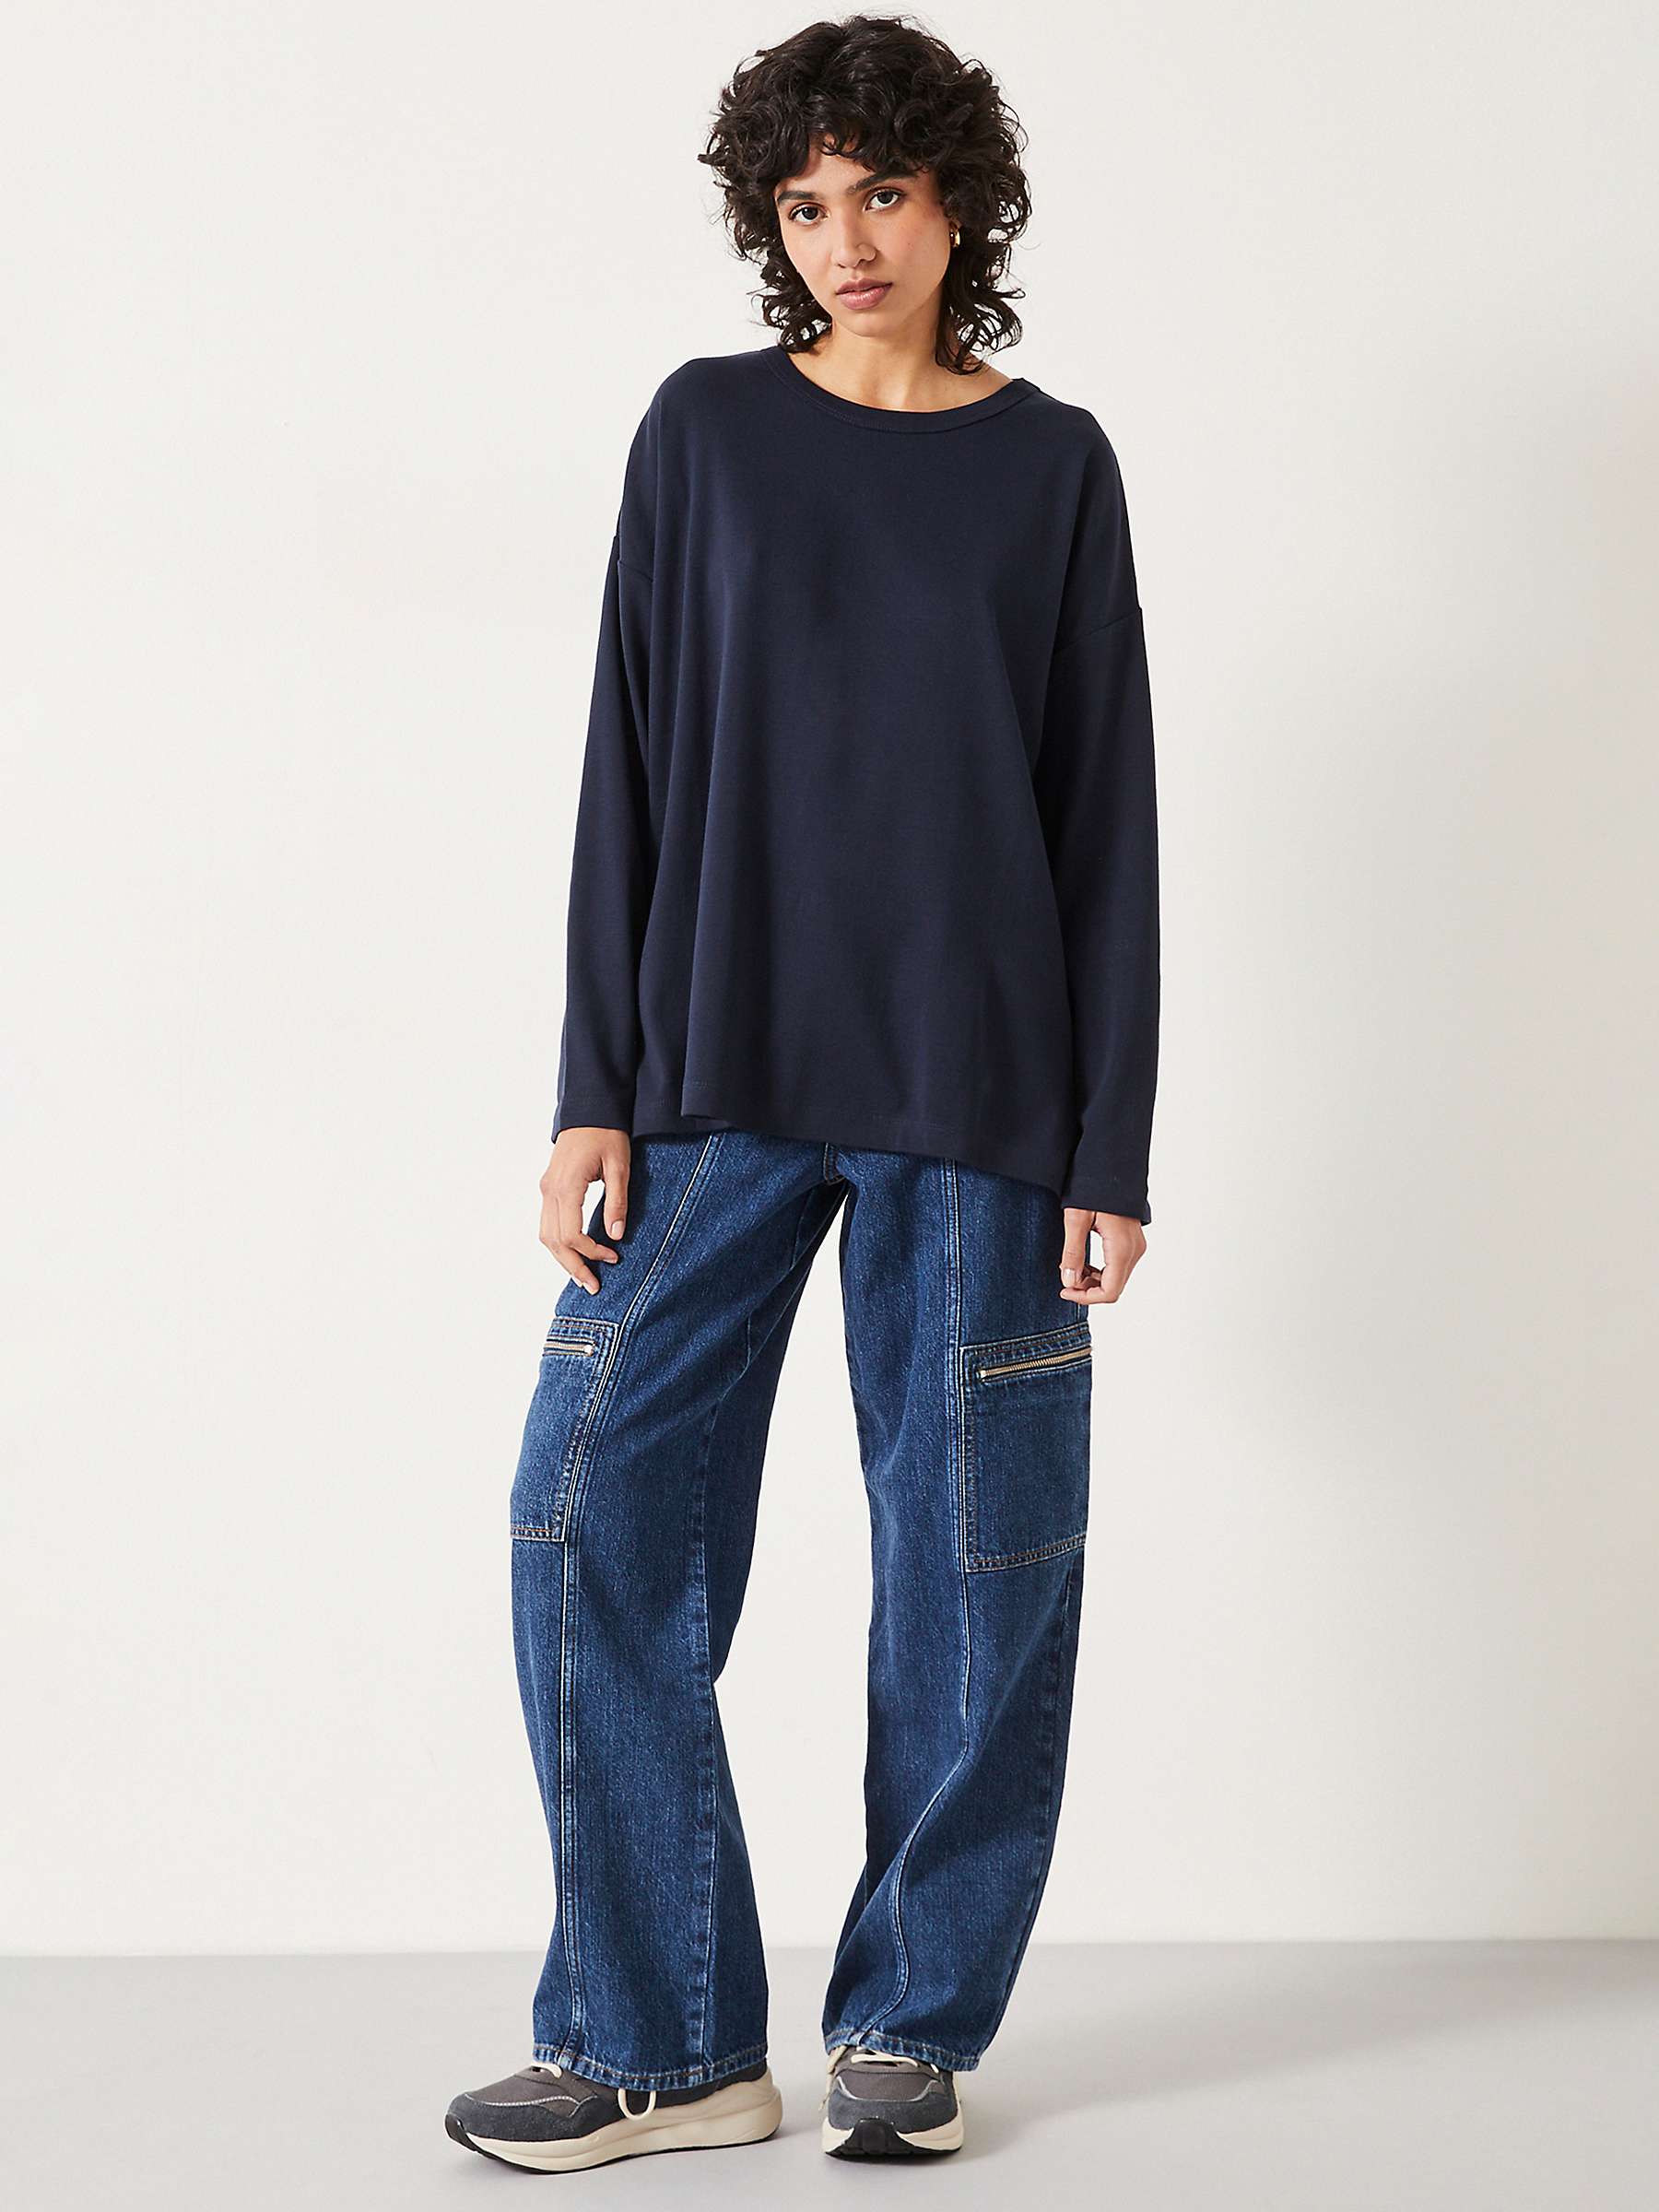 Buy HUSH Rachel Relaxed Fit Top Online at johnlewis.com